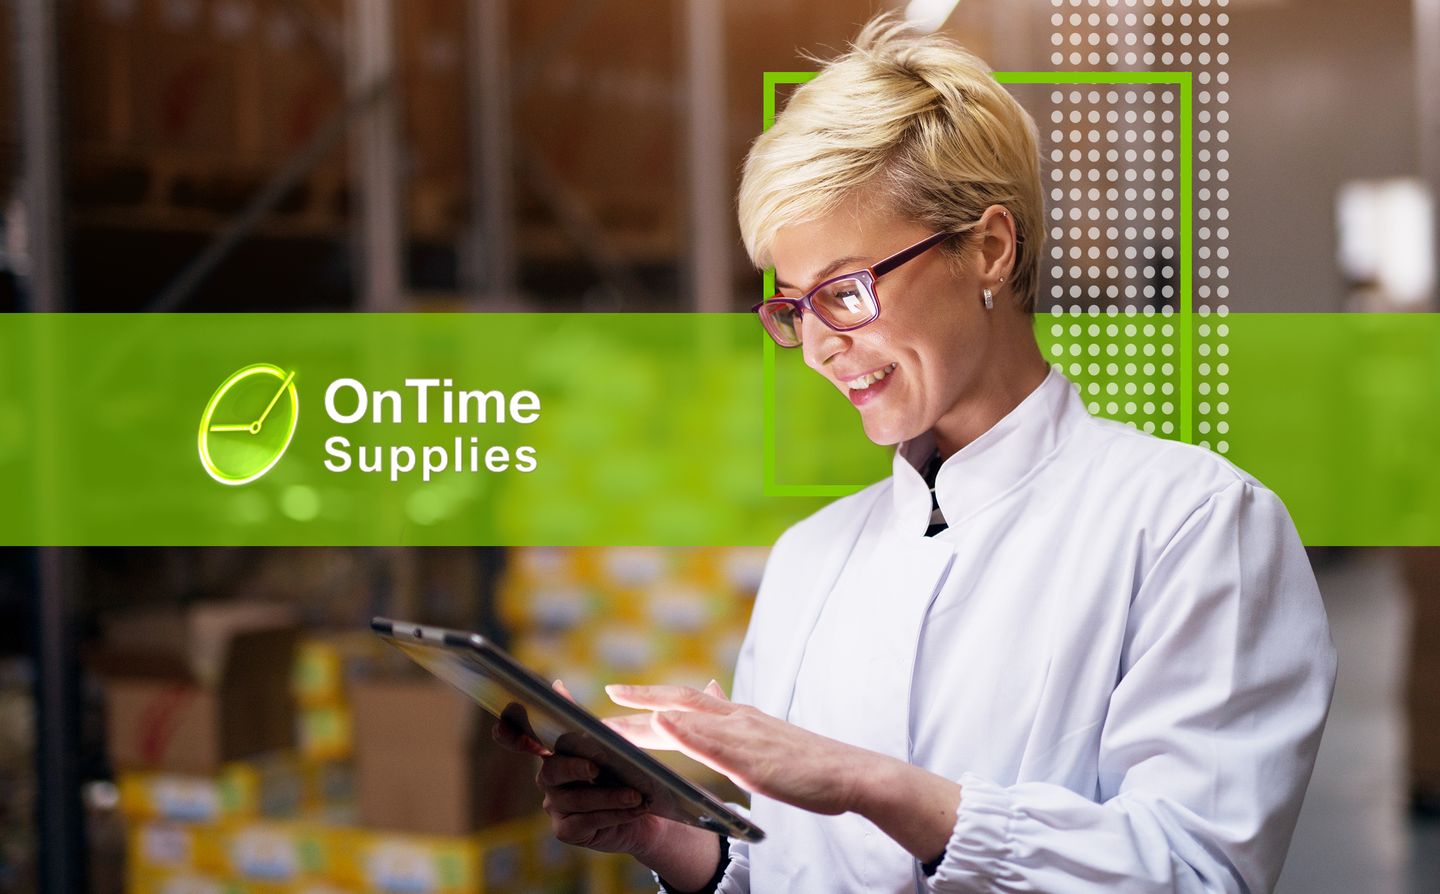 OnTimeSupplies.com increases conversions by 19.7% testing TrustedSite Certification